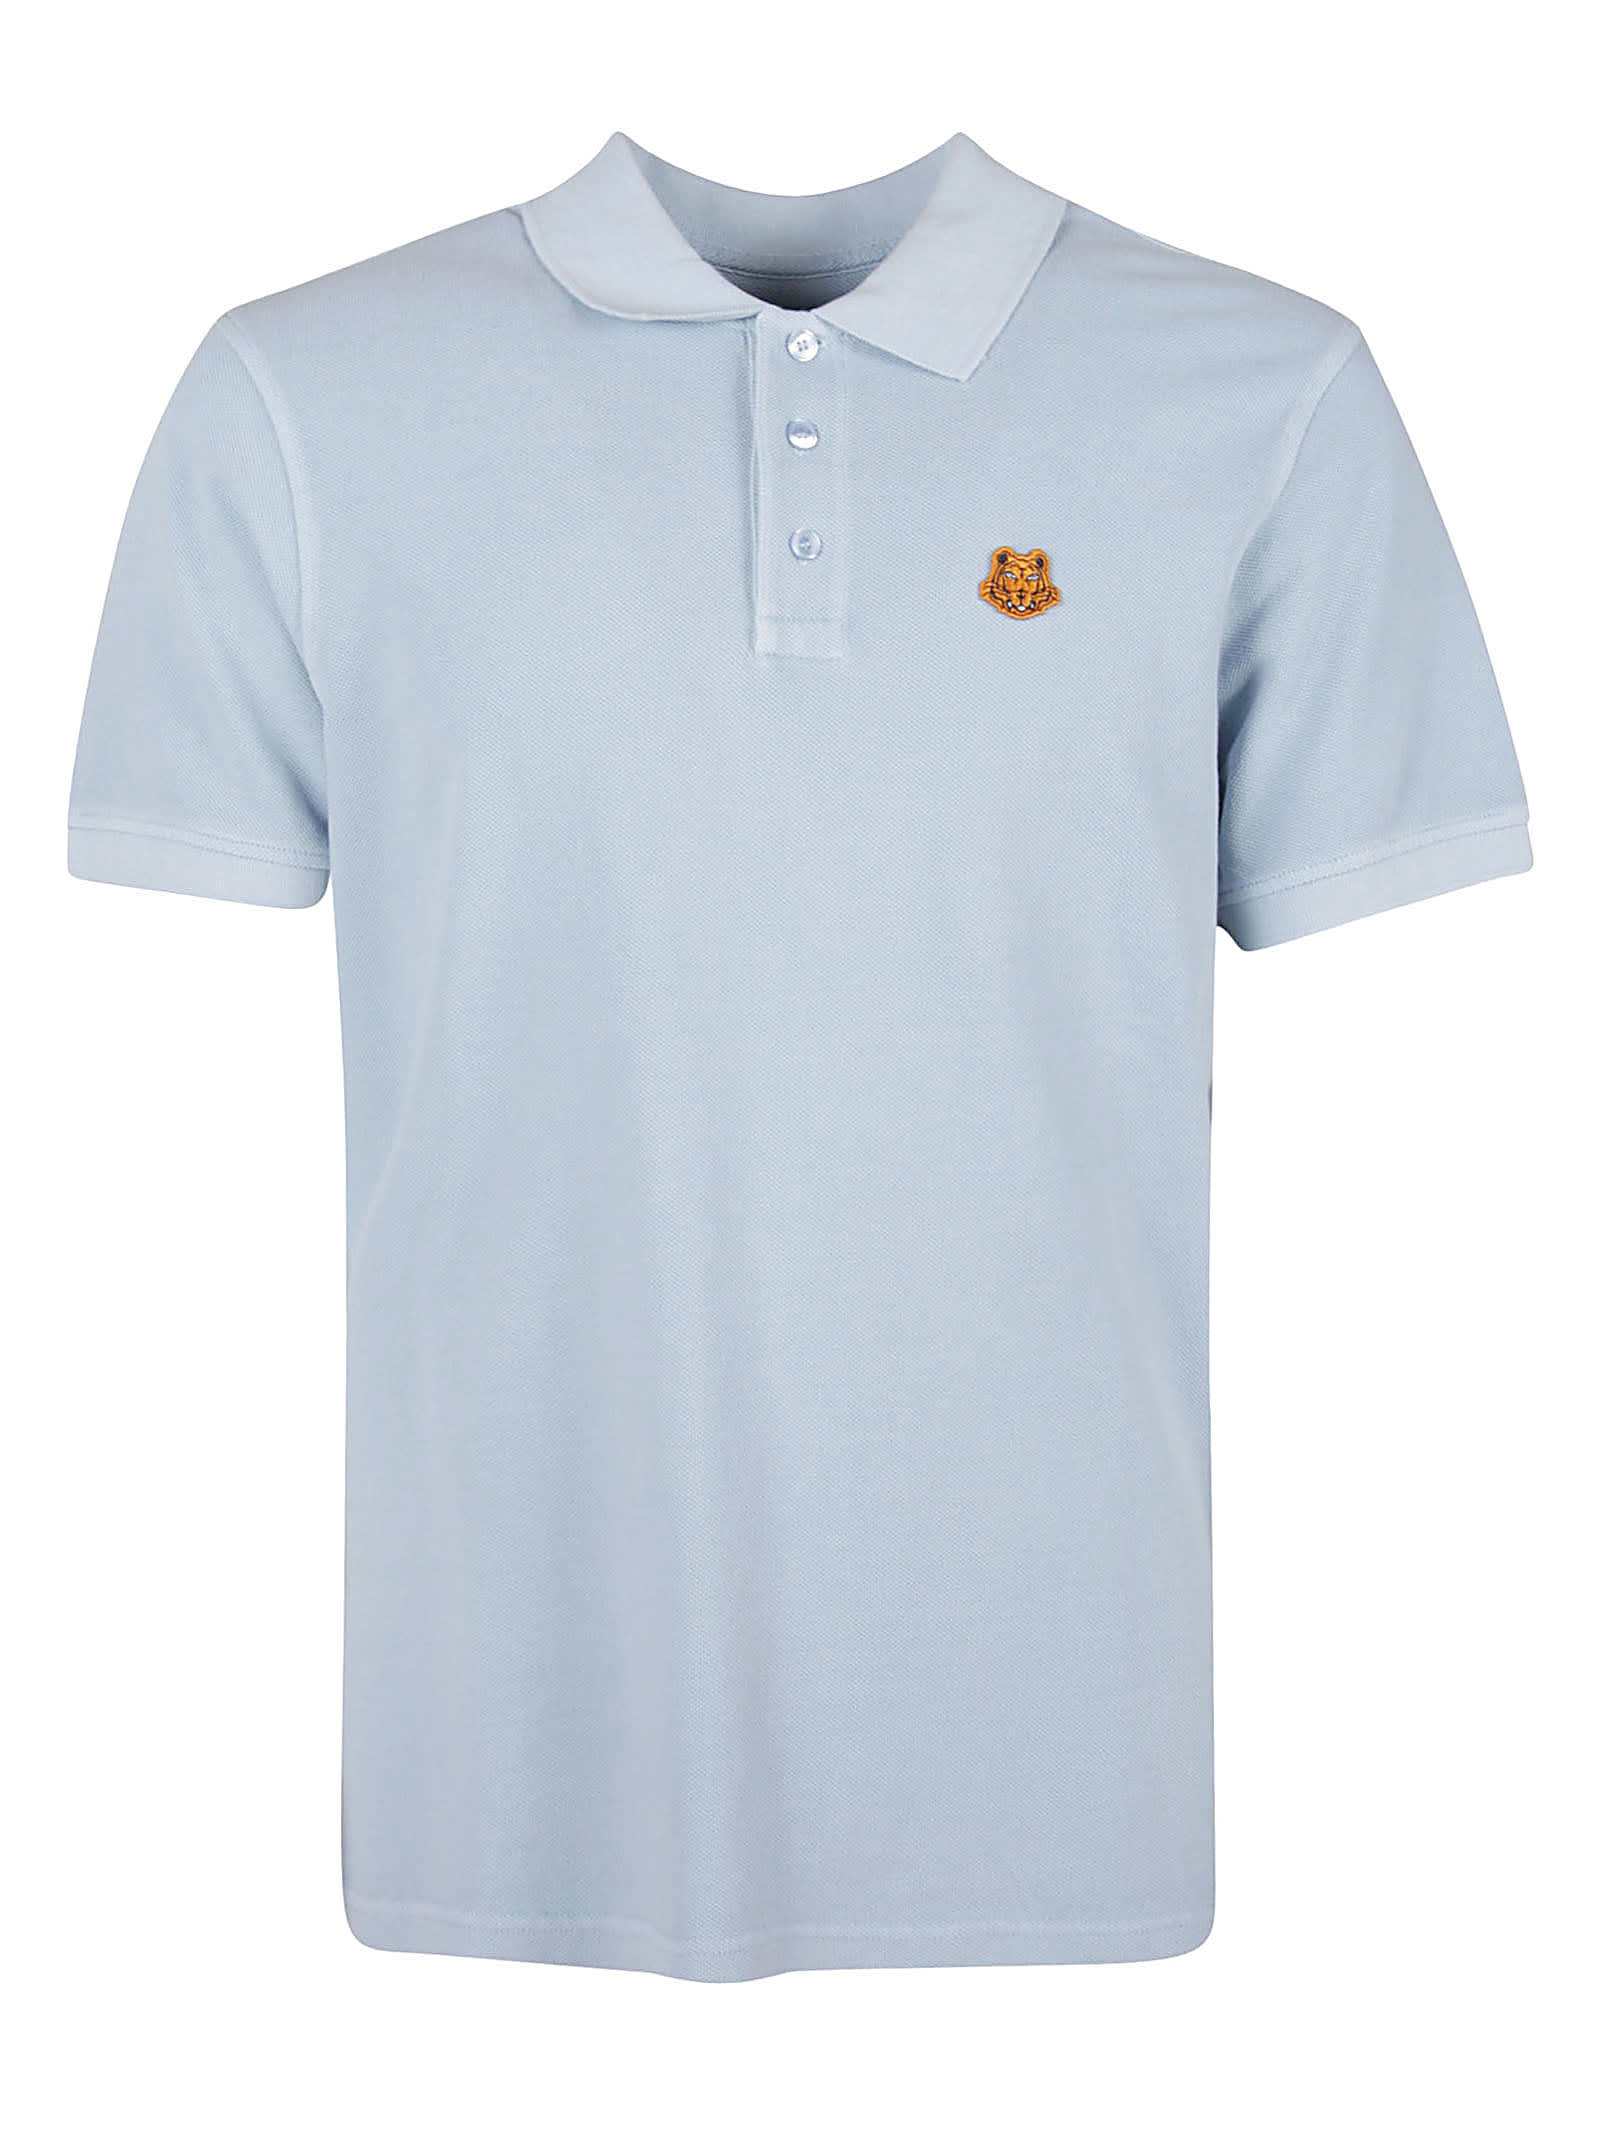 Kenzo Tiger Crest Knit Polo Shirt